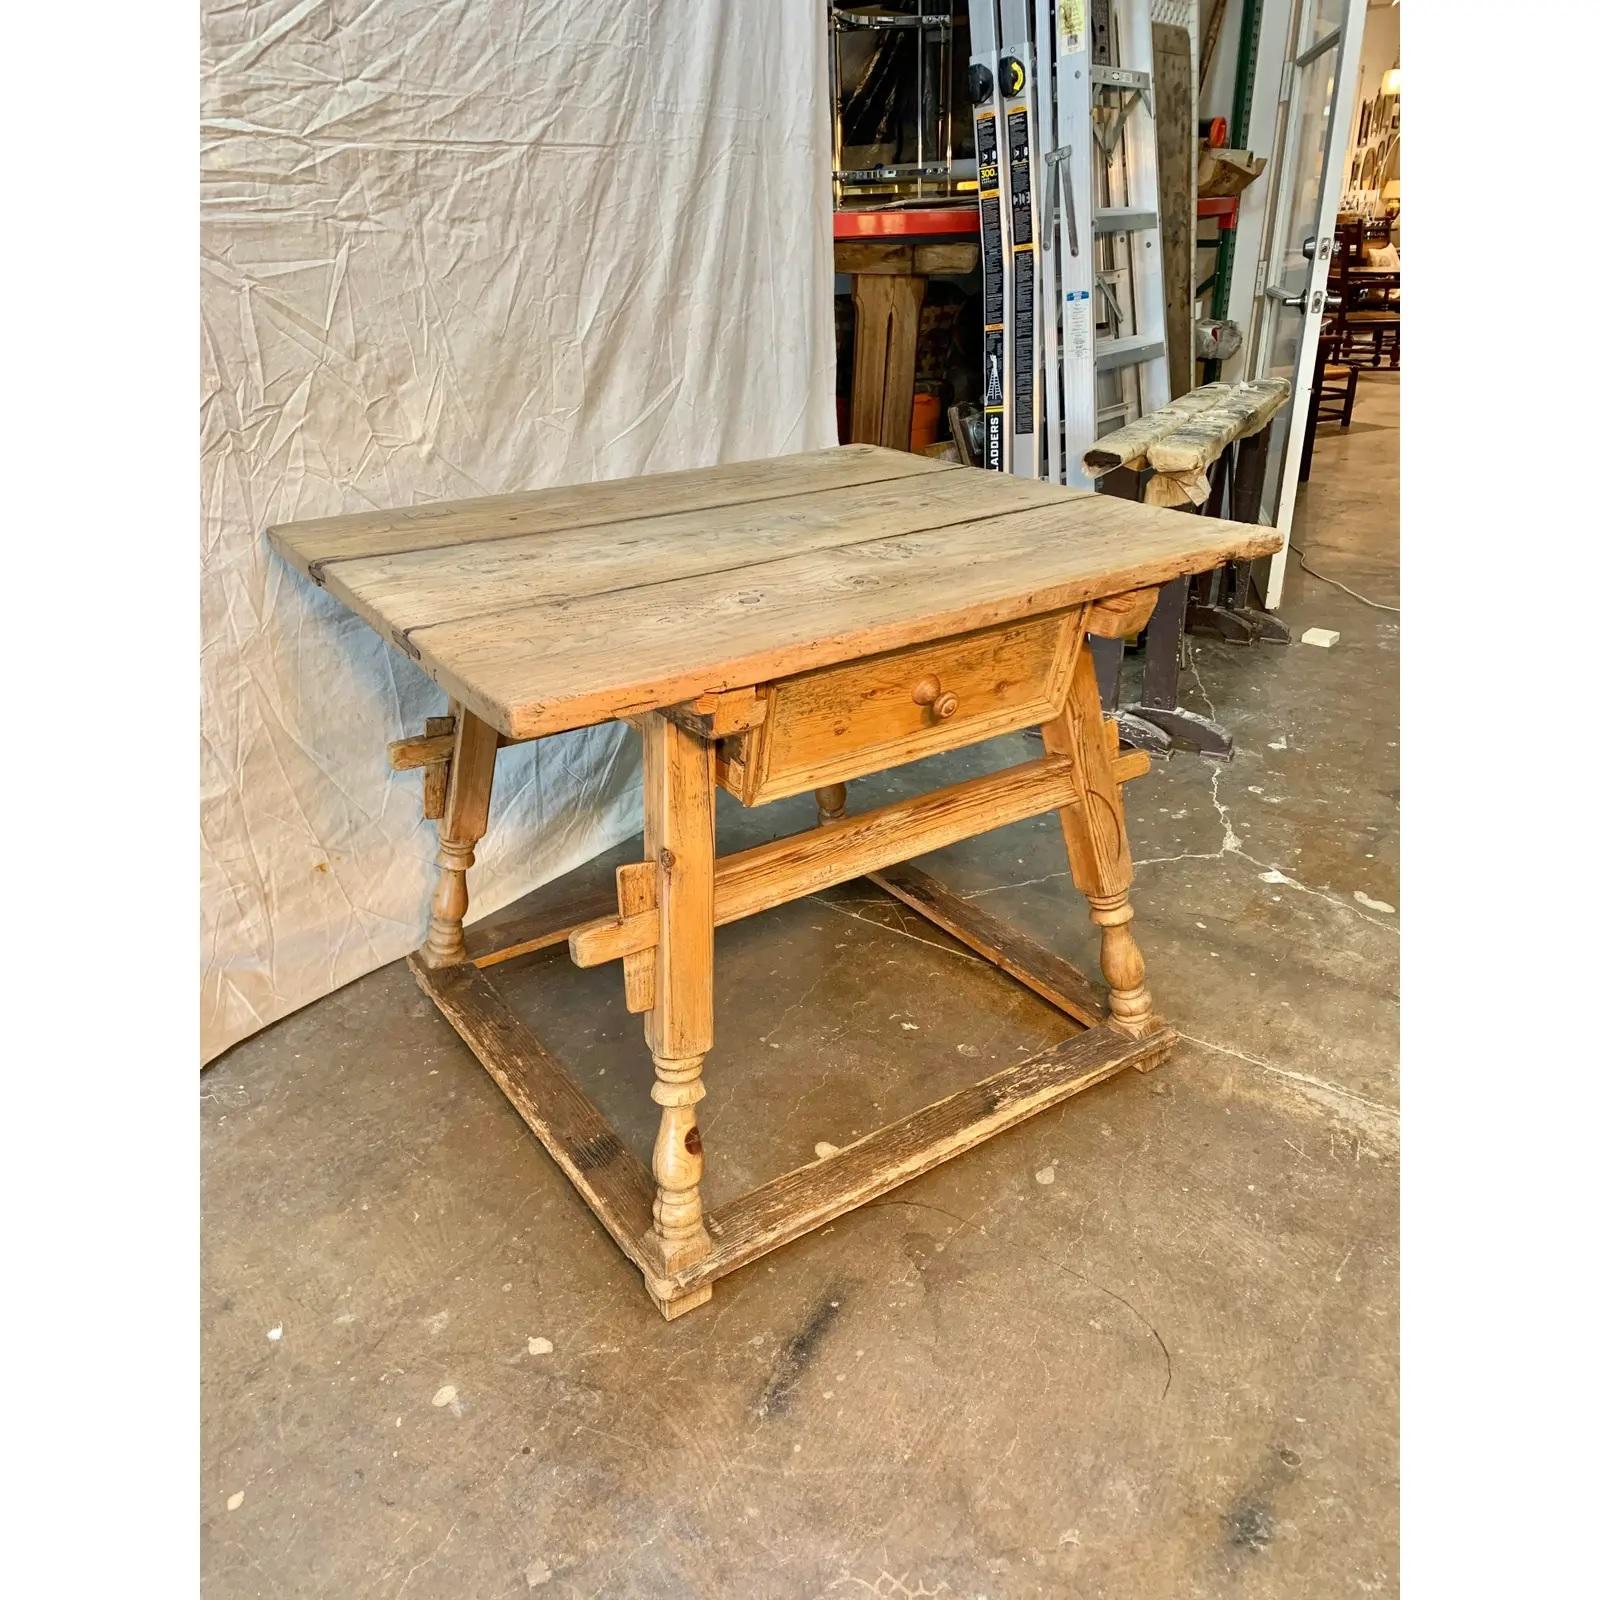 This French Pine Merchant or Bankers Center Table was handmade in the 1800s. The table features a 1.25